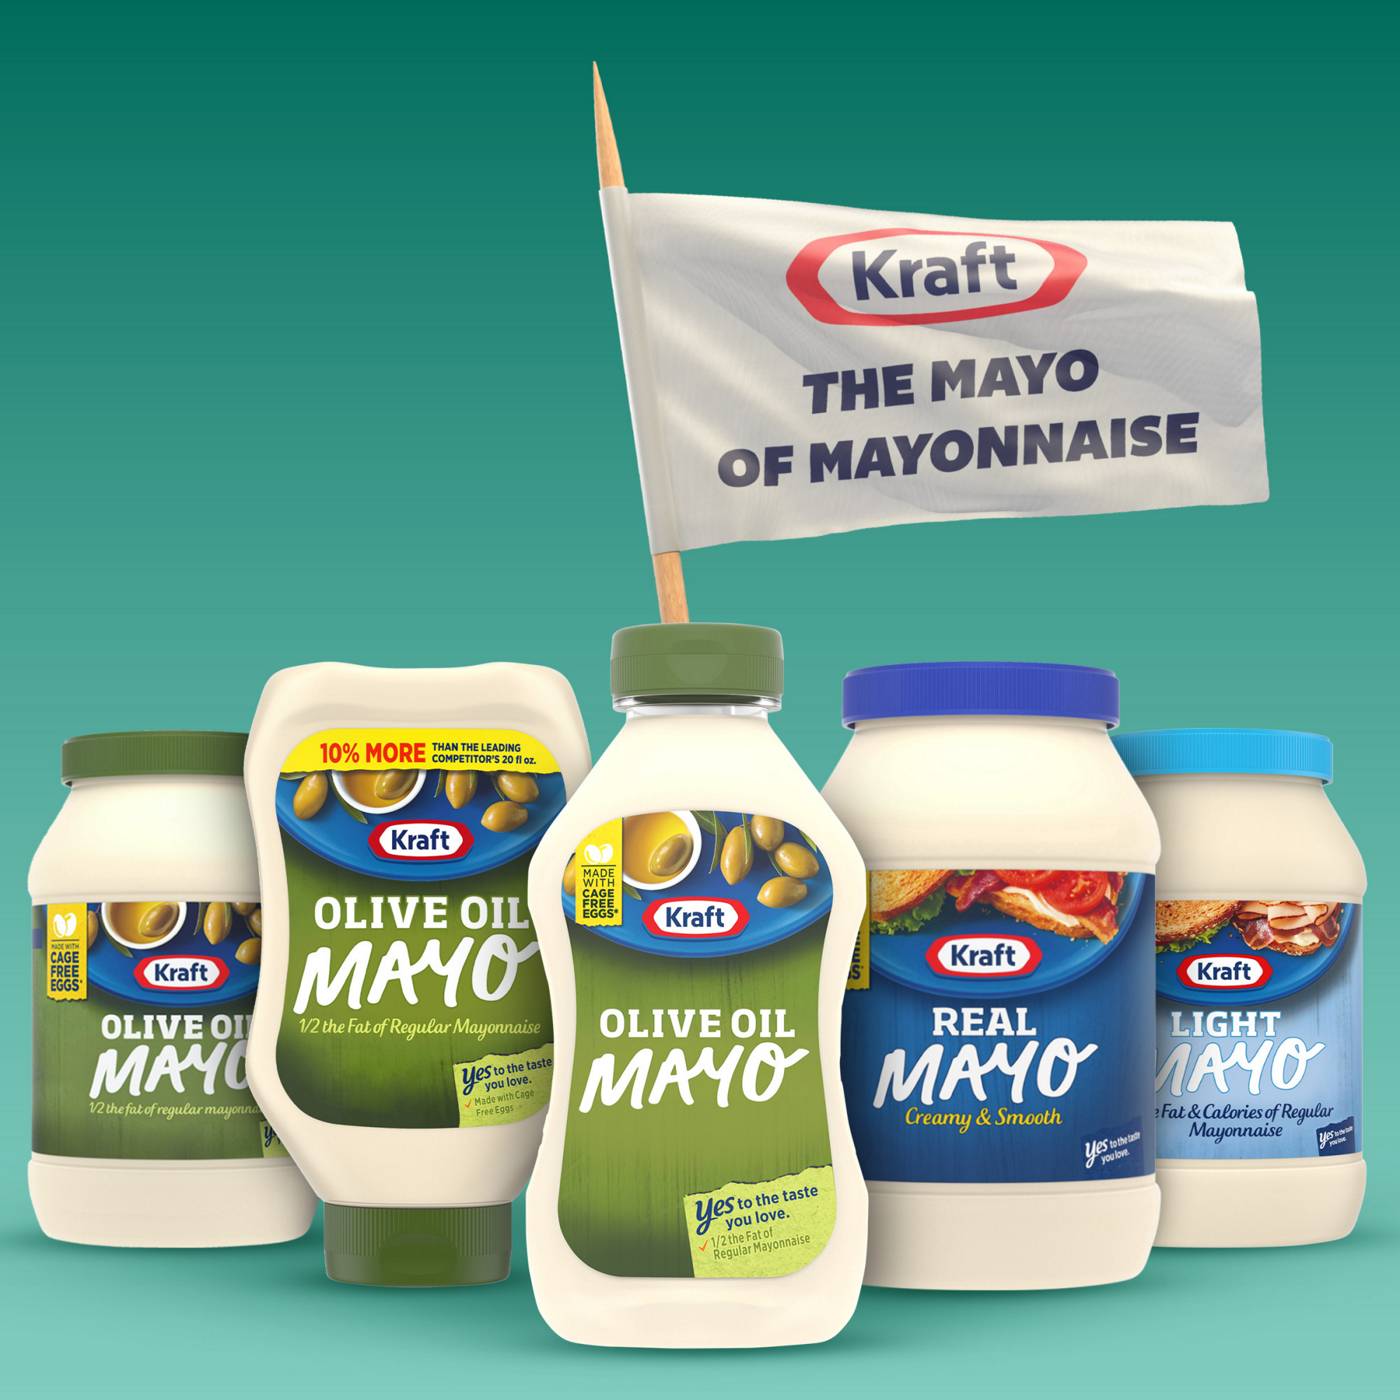 Kraft Mayo Reduced Fat Mayonnaise with Olive Oil; image 5 of 9